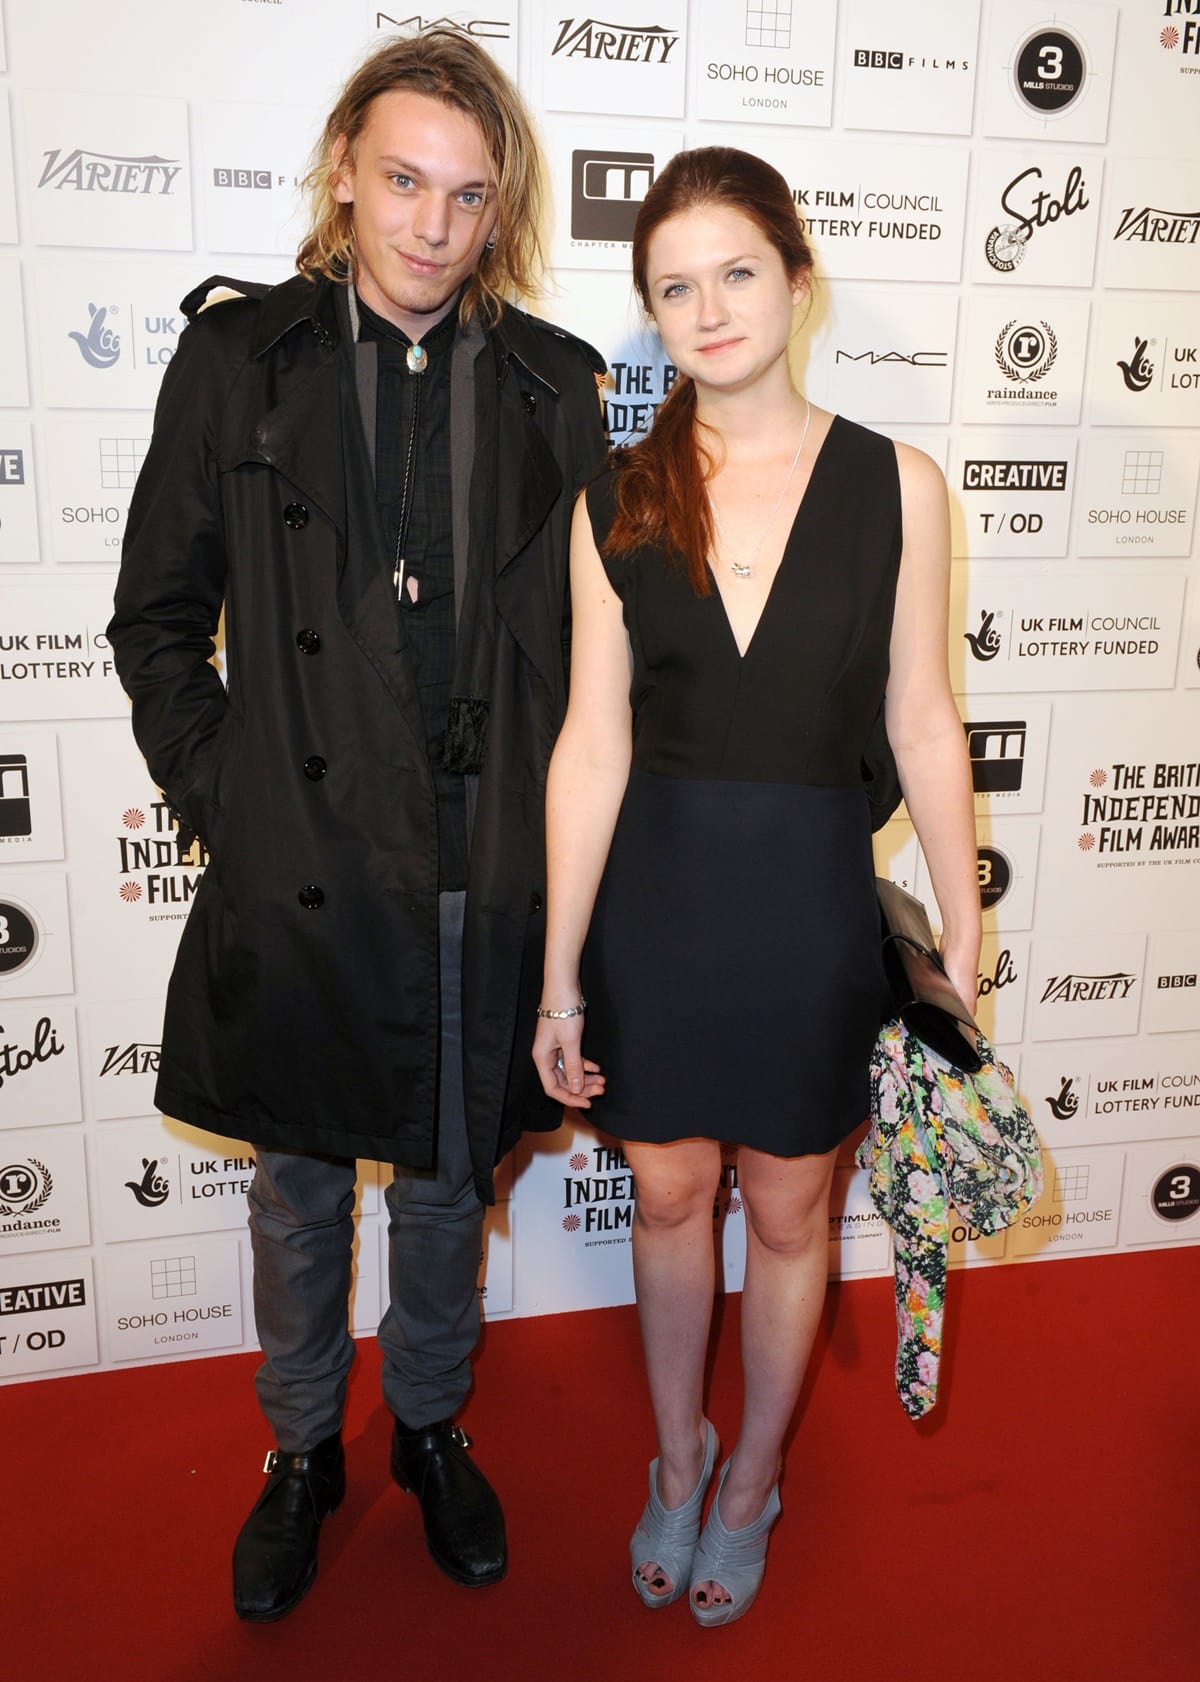 Jamie Campbell Bower and Bonnie Wright announced their split in June 2012 after one year of engagement